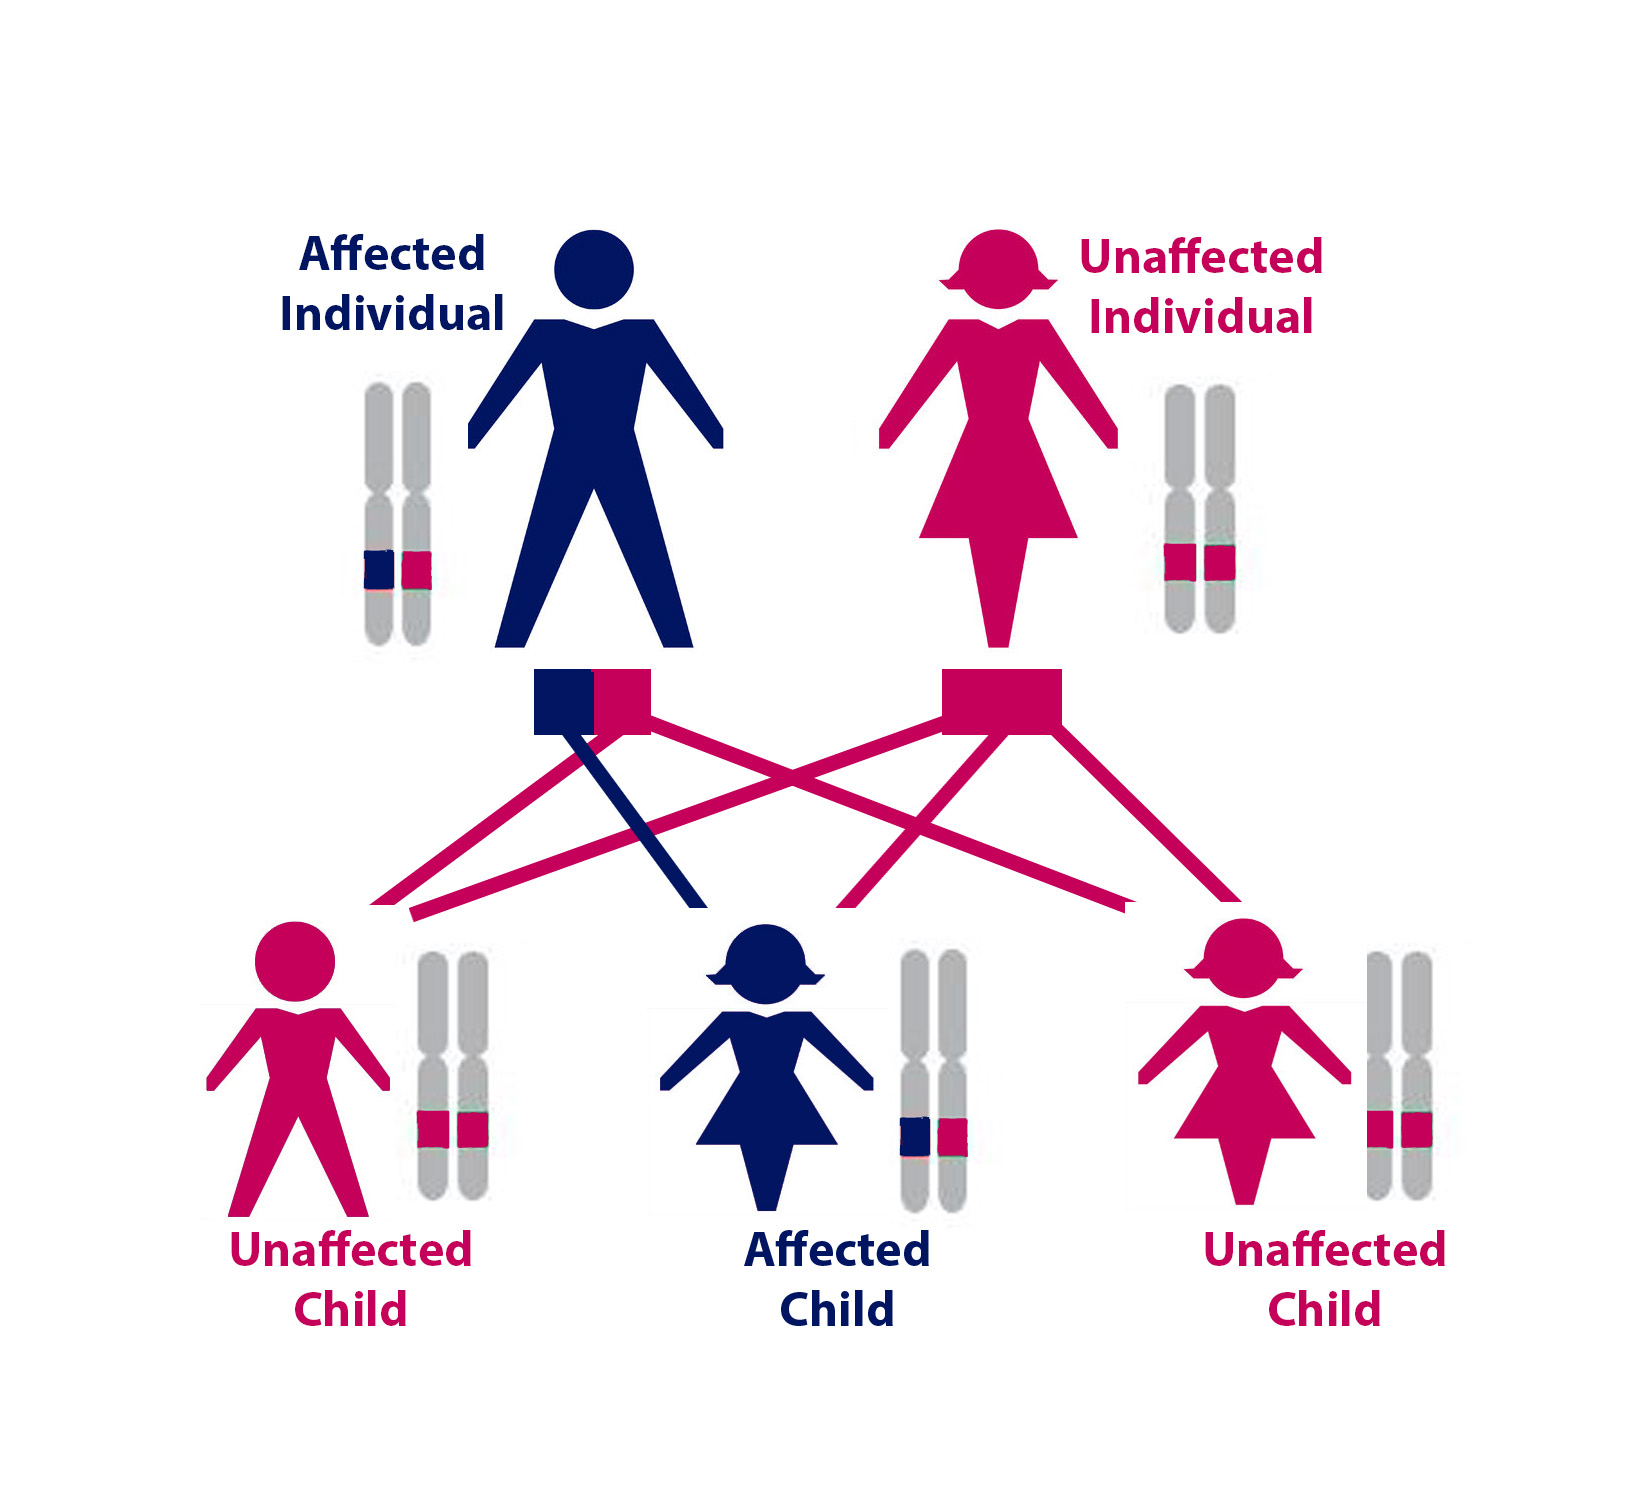 One possible configuration of a family of five, where one parent has HHT. Each of the three children had a 50% chance of inheriting the HHT gene mutation. In this case, only one of the three children inherited HHT.